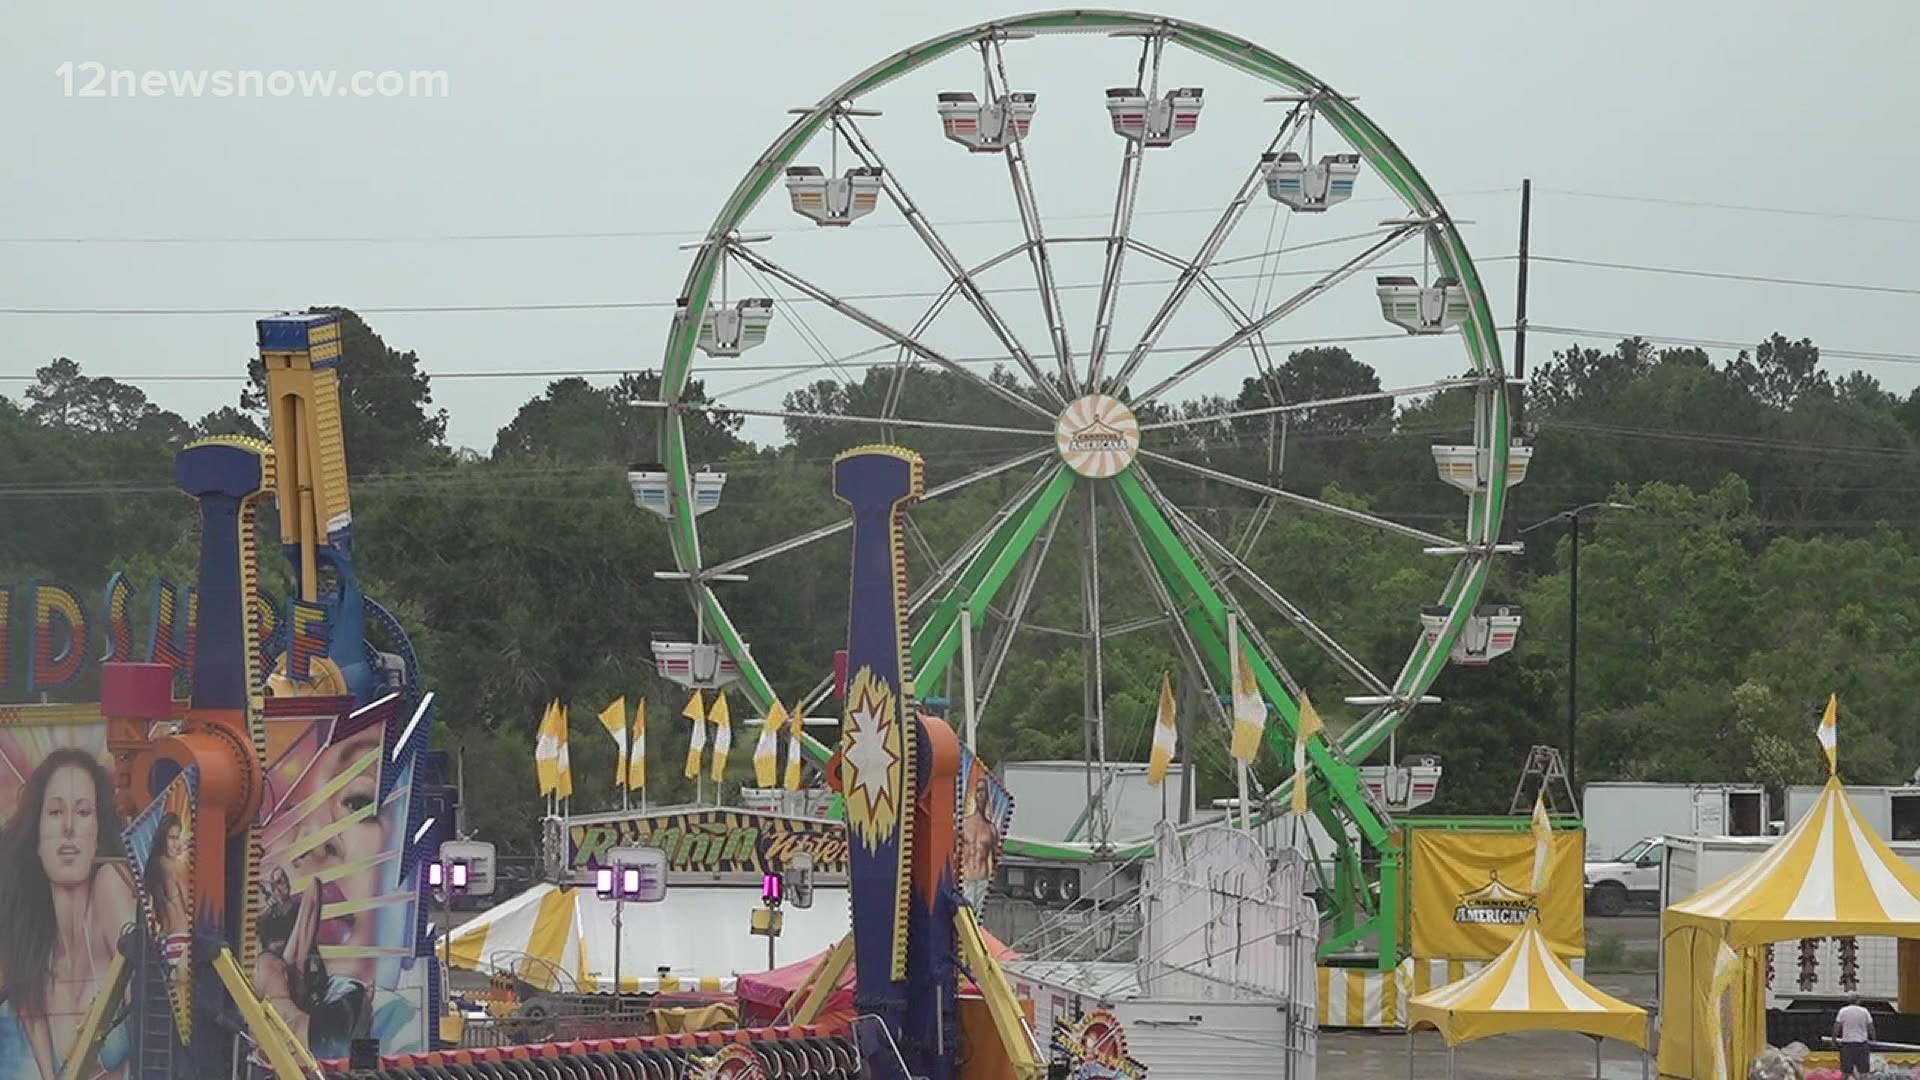 YMBL State Fair is off to a soggy start ahead of opening weekend